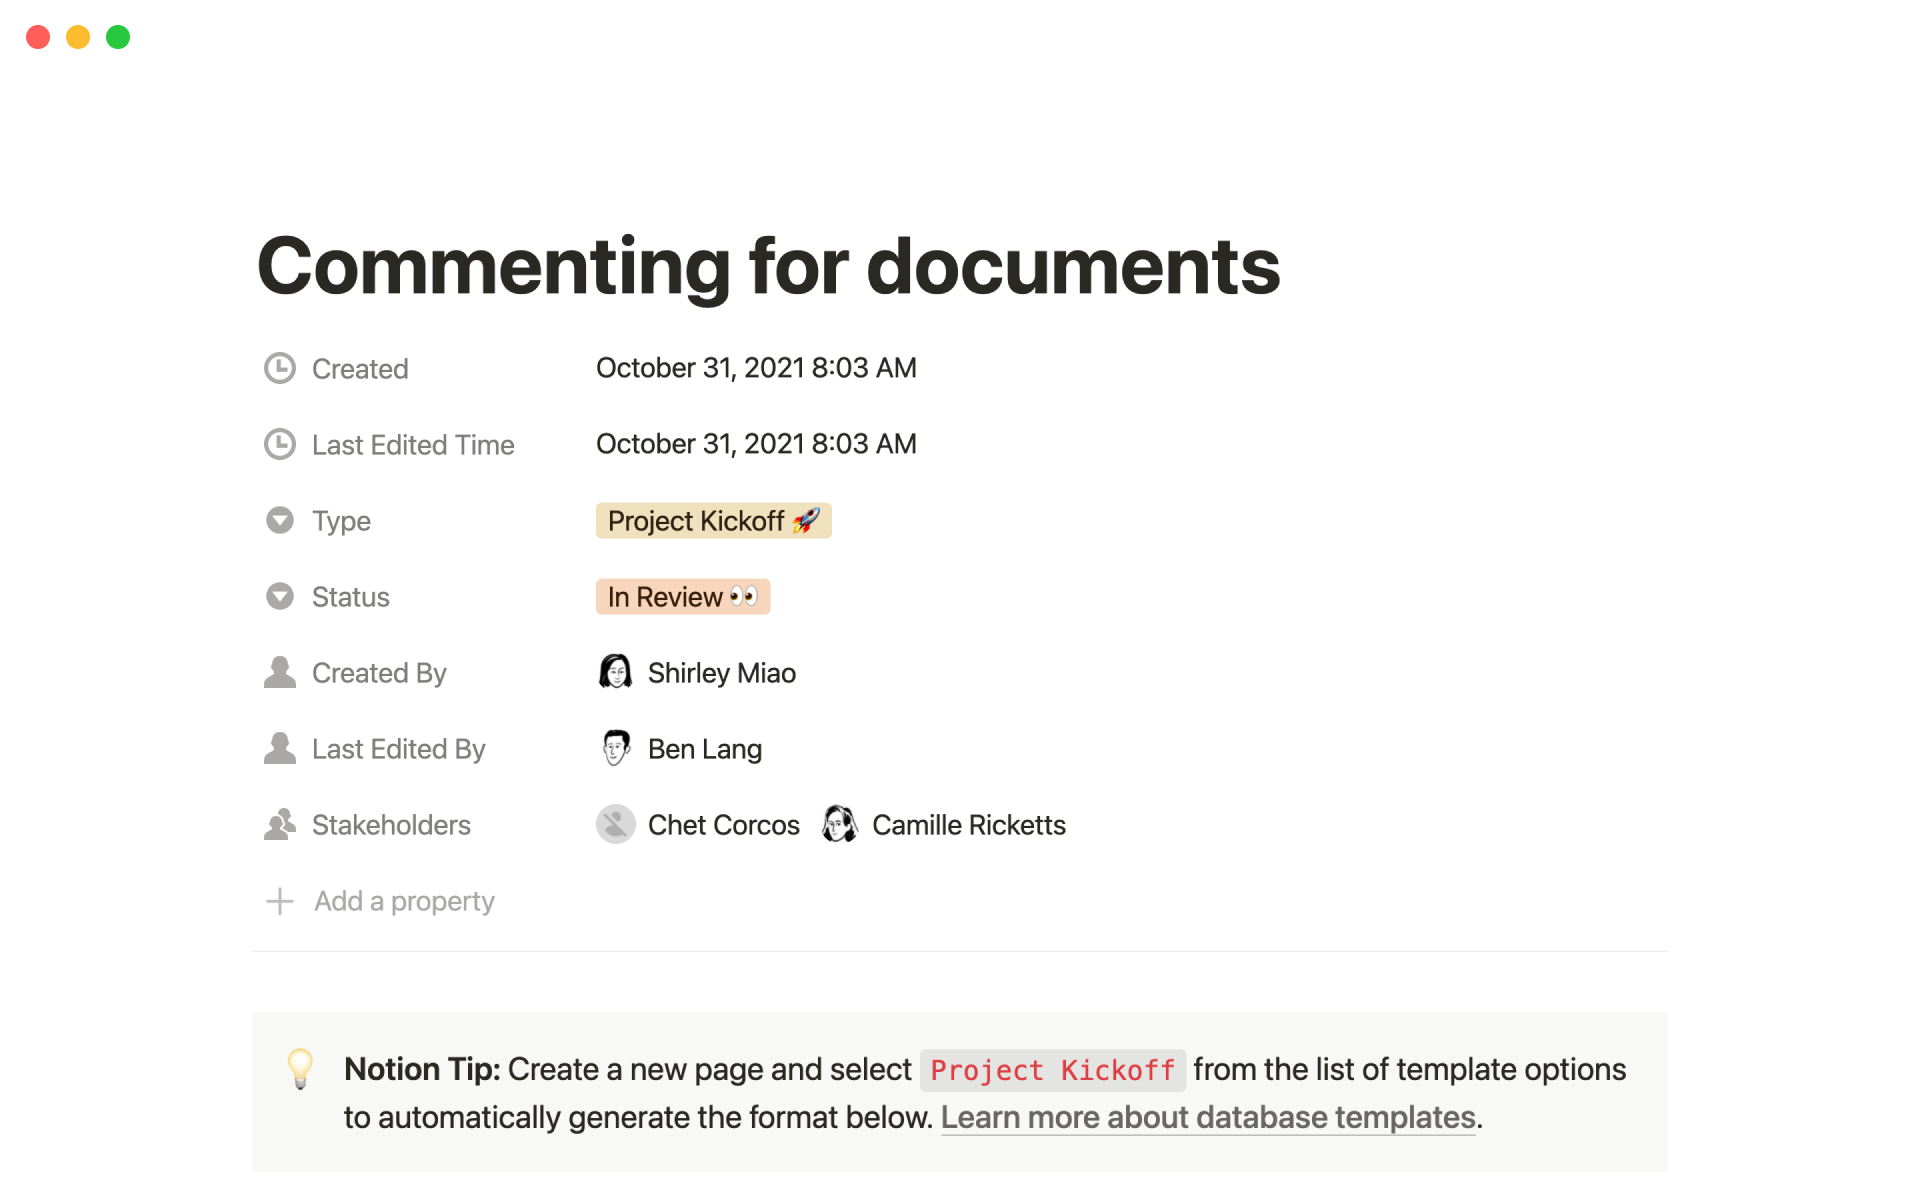 Use this template to organize documents like technical specs, architecture overviews, and project kickoff notes. 